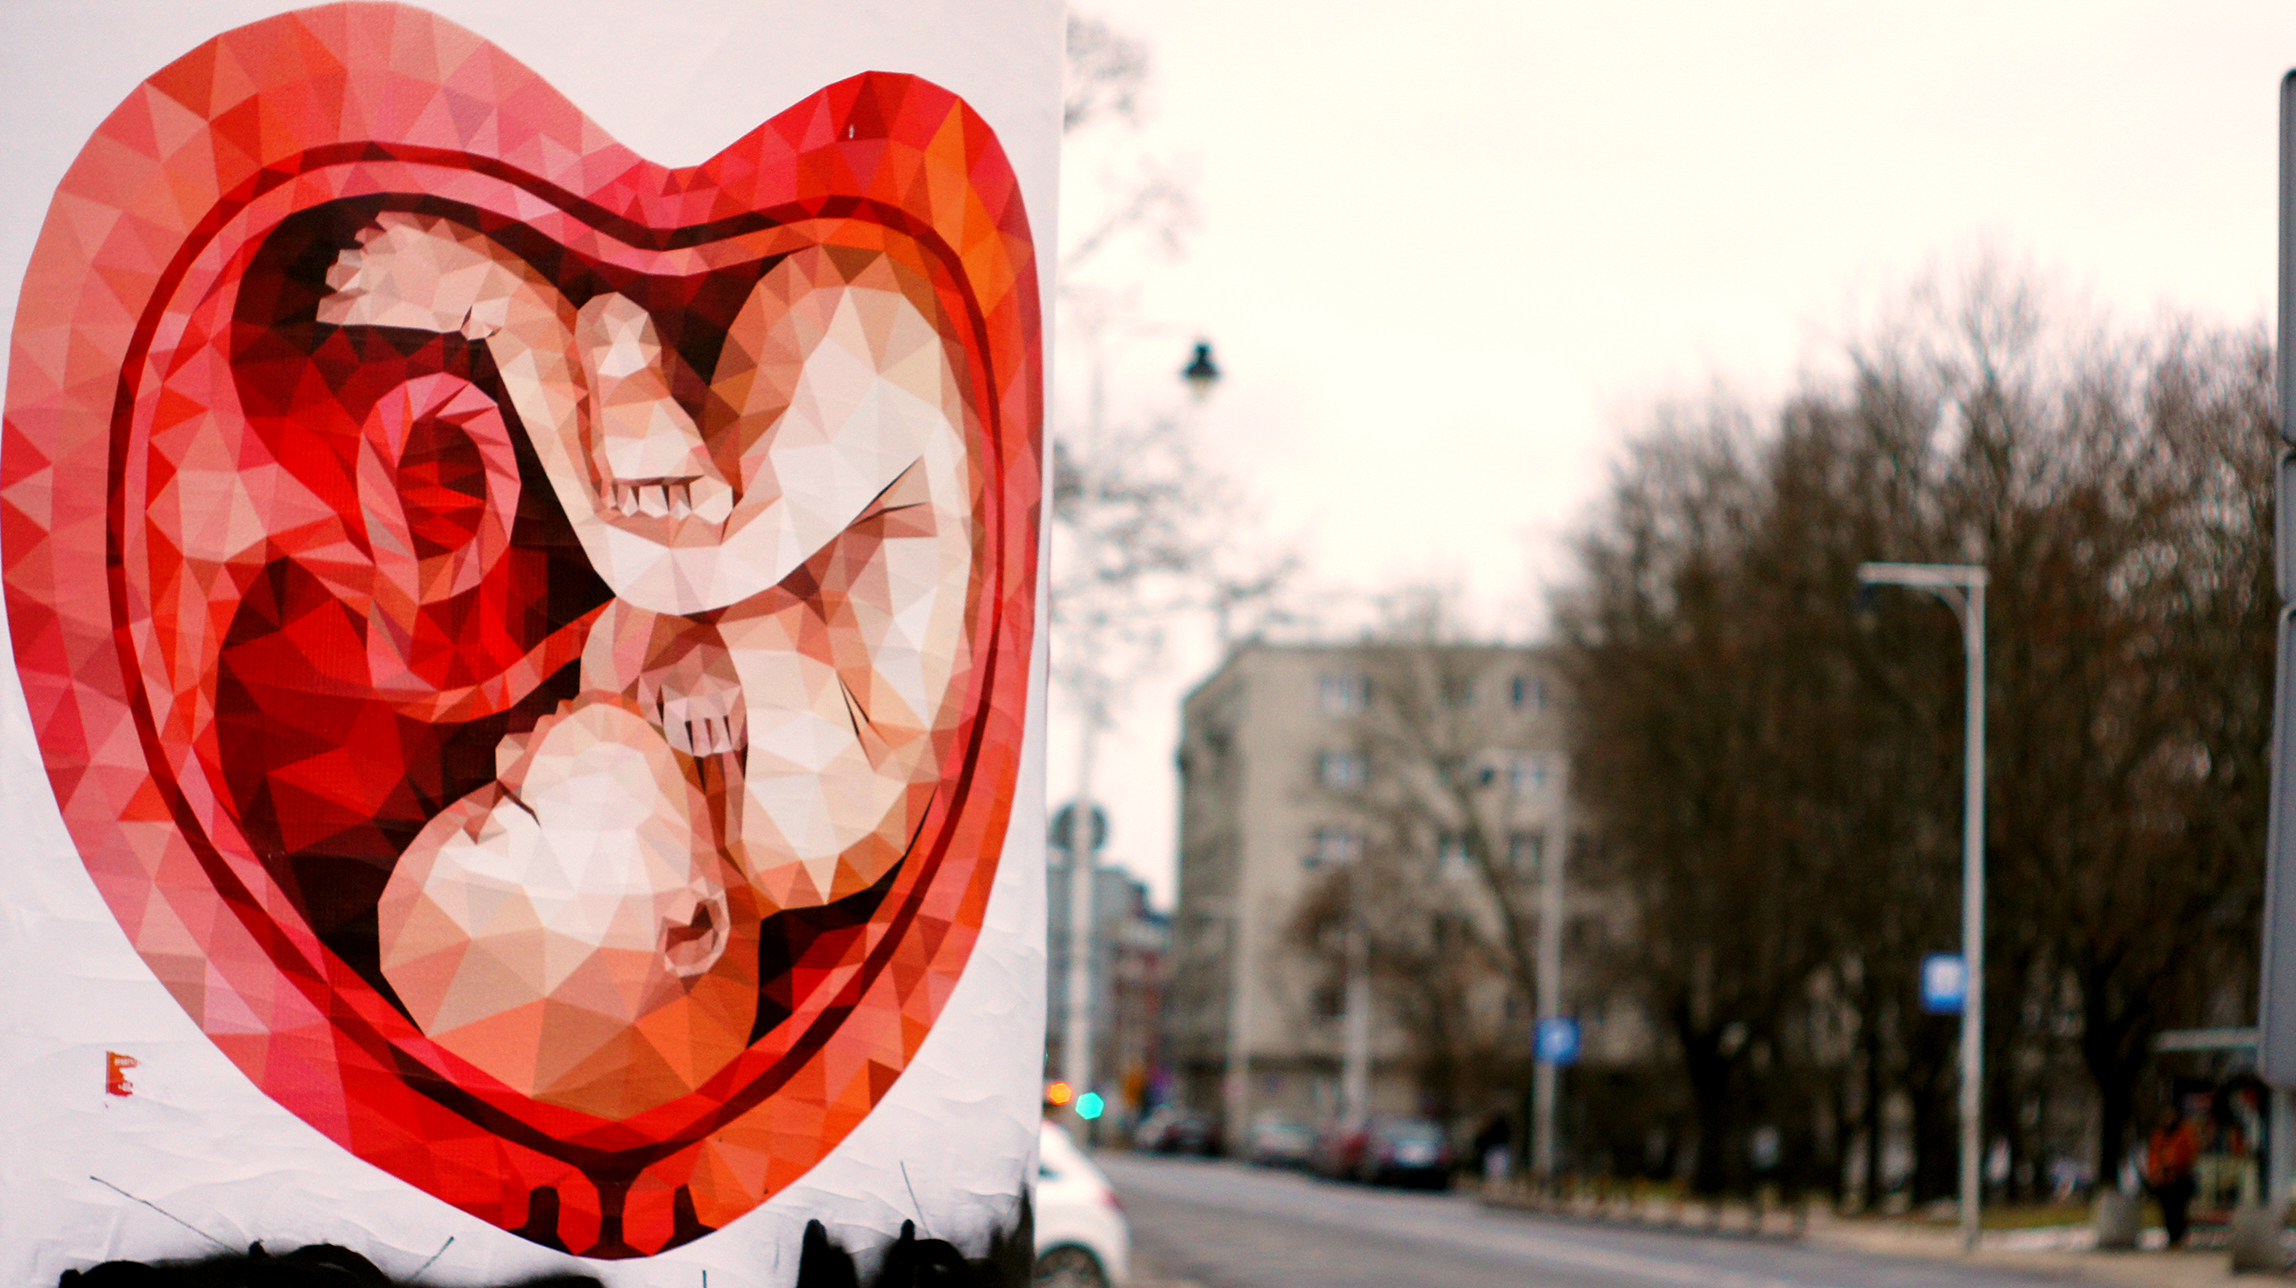 Anti-abortion poster in Warsaw, February 2021